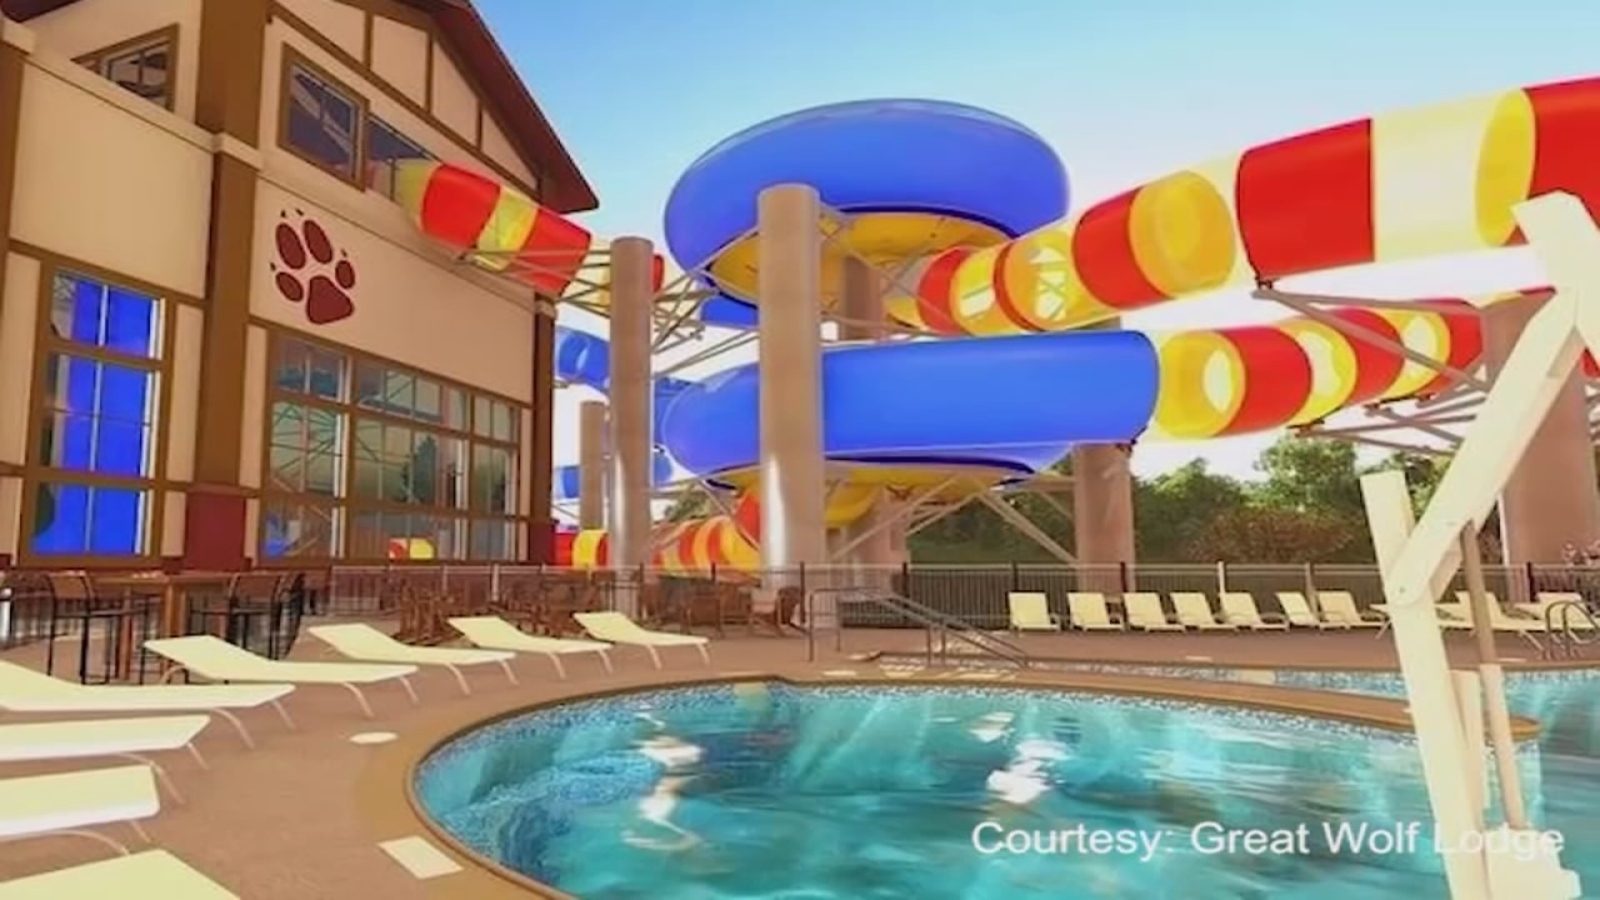 See new waterslides coming to Great Wolf Lodge in Gurnee